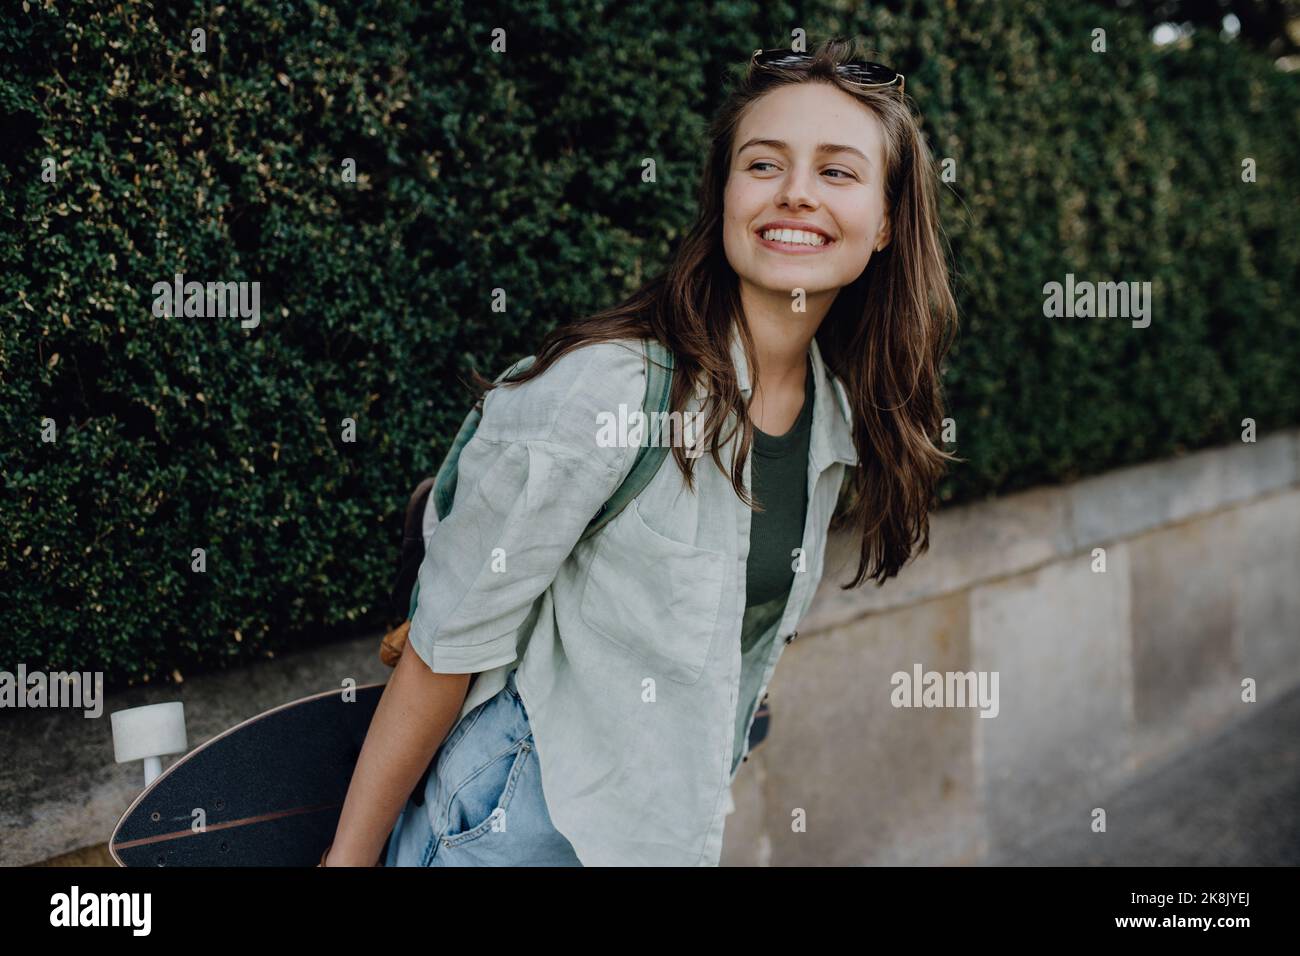 Portrait of young happy woman outdoor with skateboard. Youth culture and commuting concept. Stock Photo